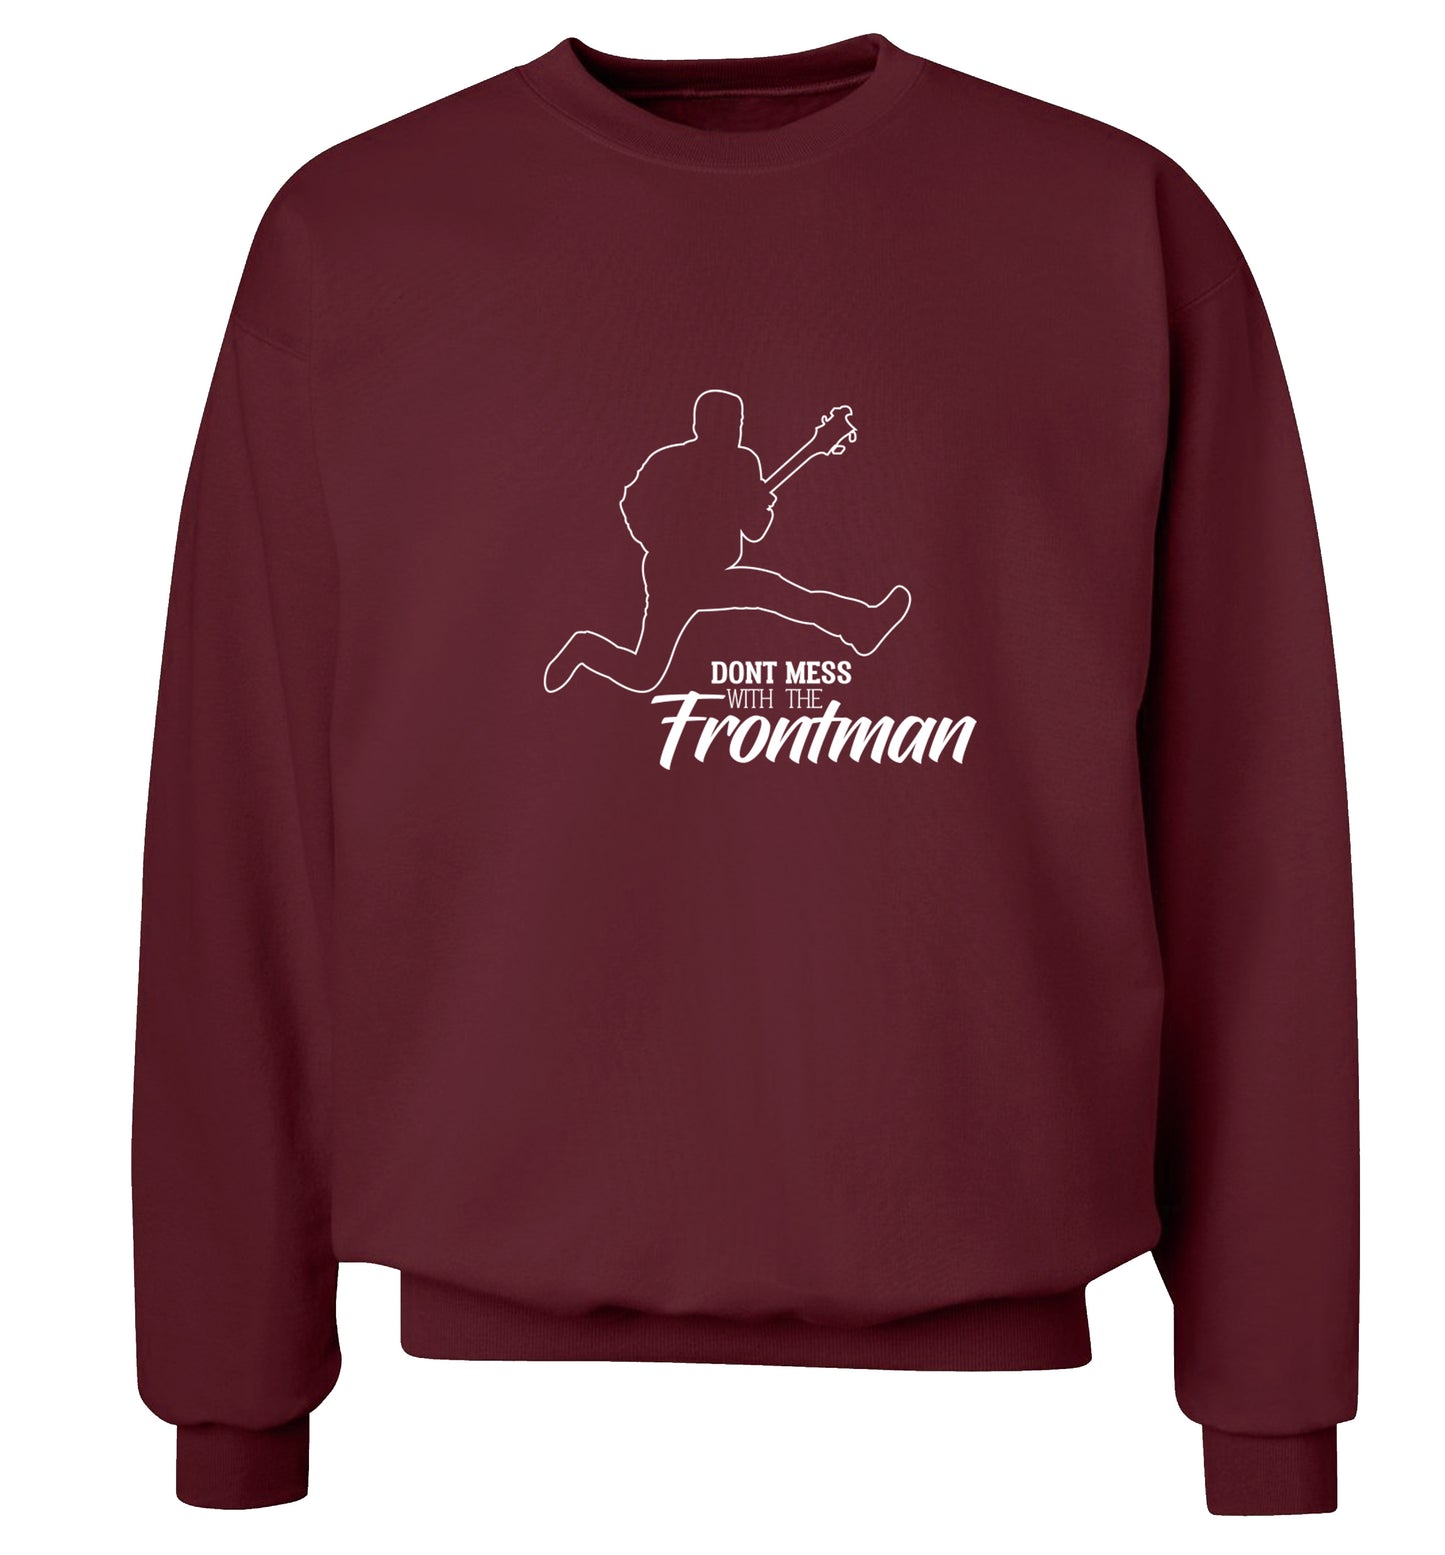 Don't mess with the frontman Adult's unisex maroon Sweater 2XL